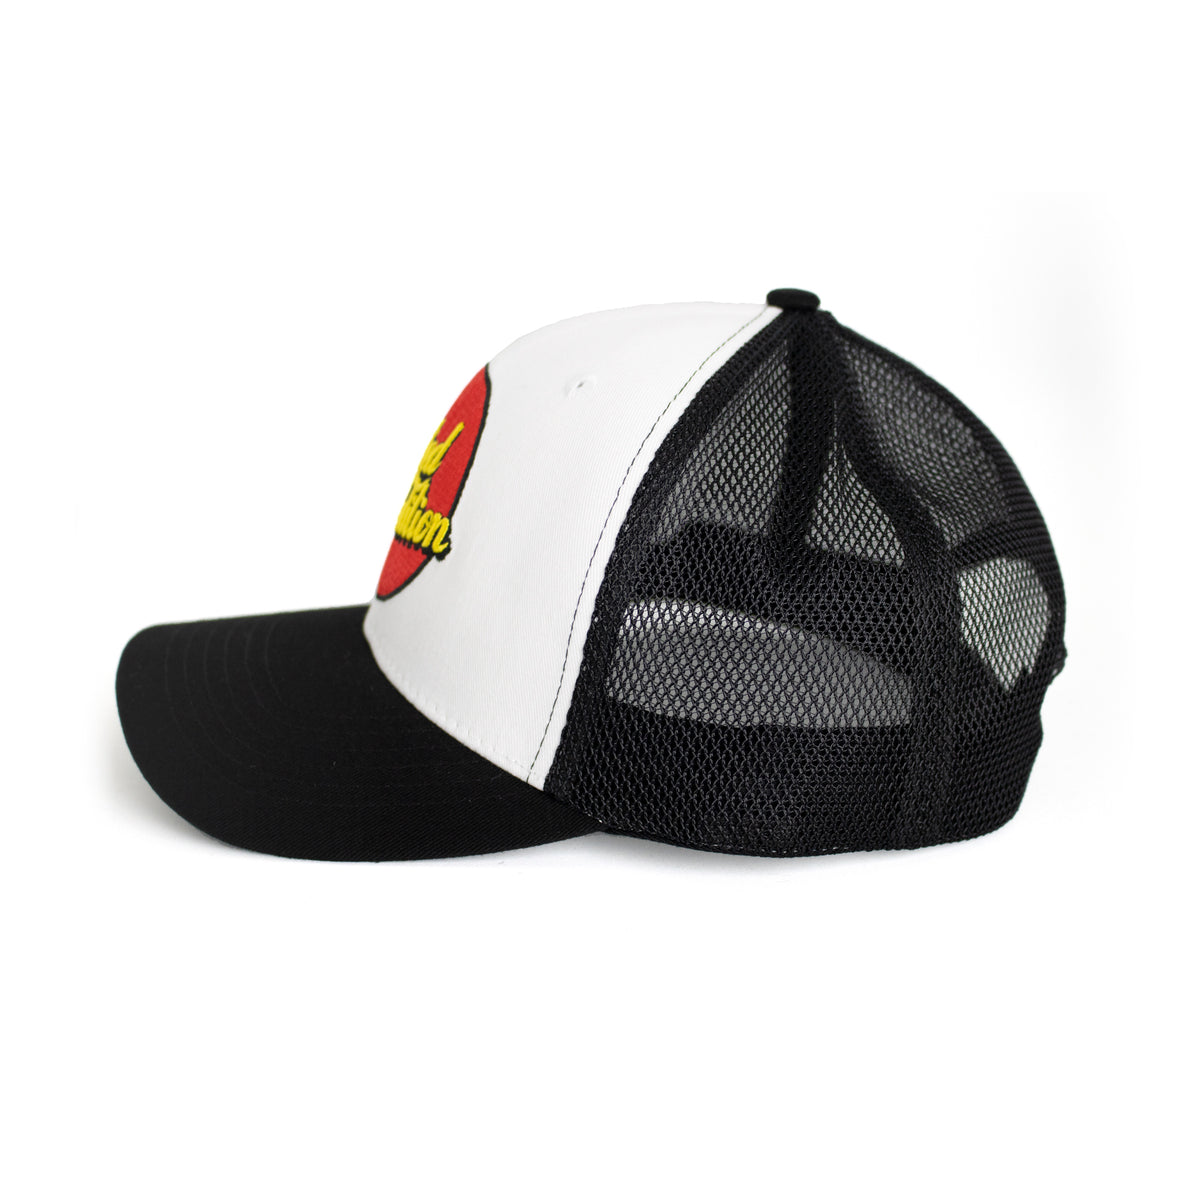 Limited Edition NEW DAWN Snap Back Trucker Hat - Nomad Bodyboards